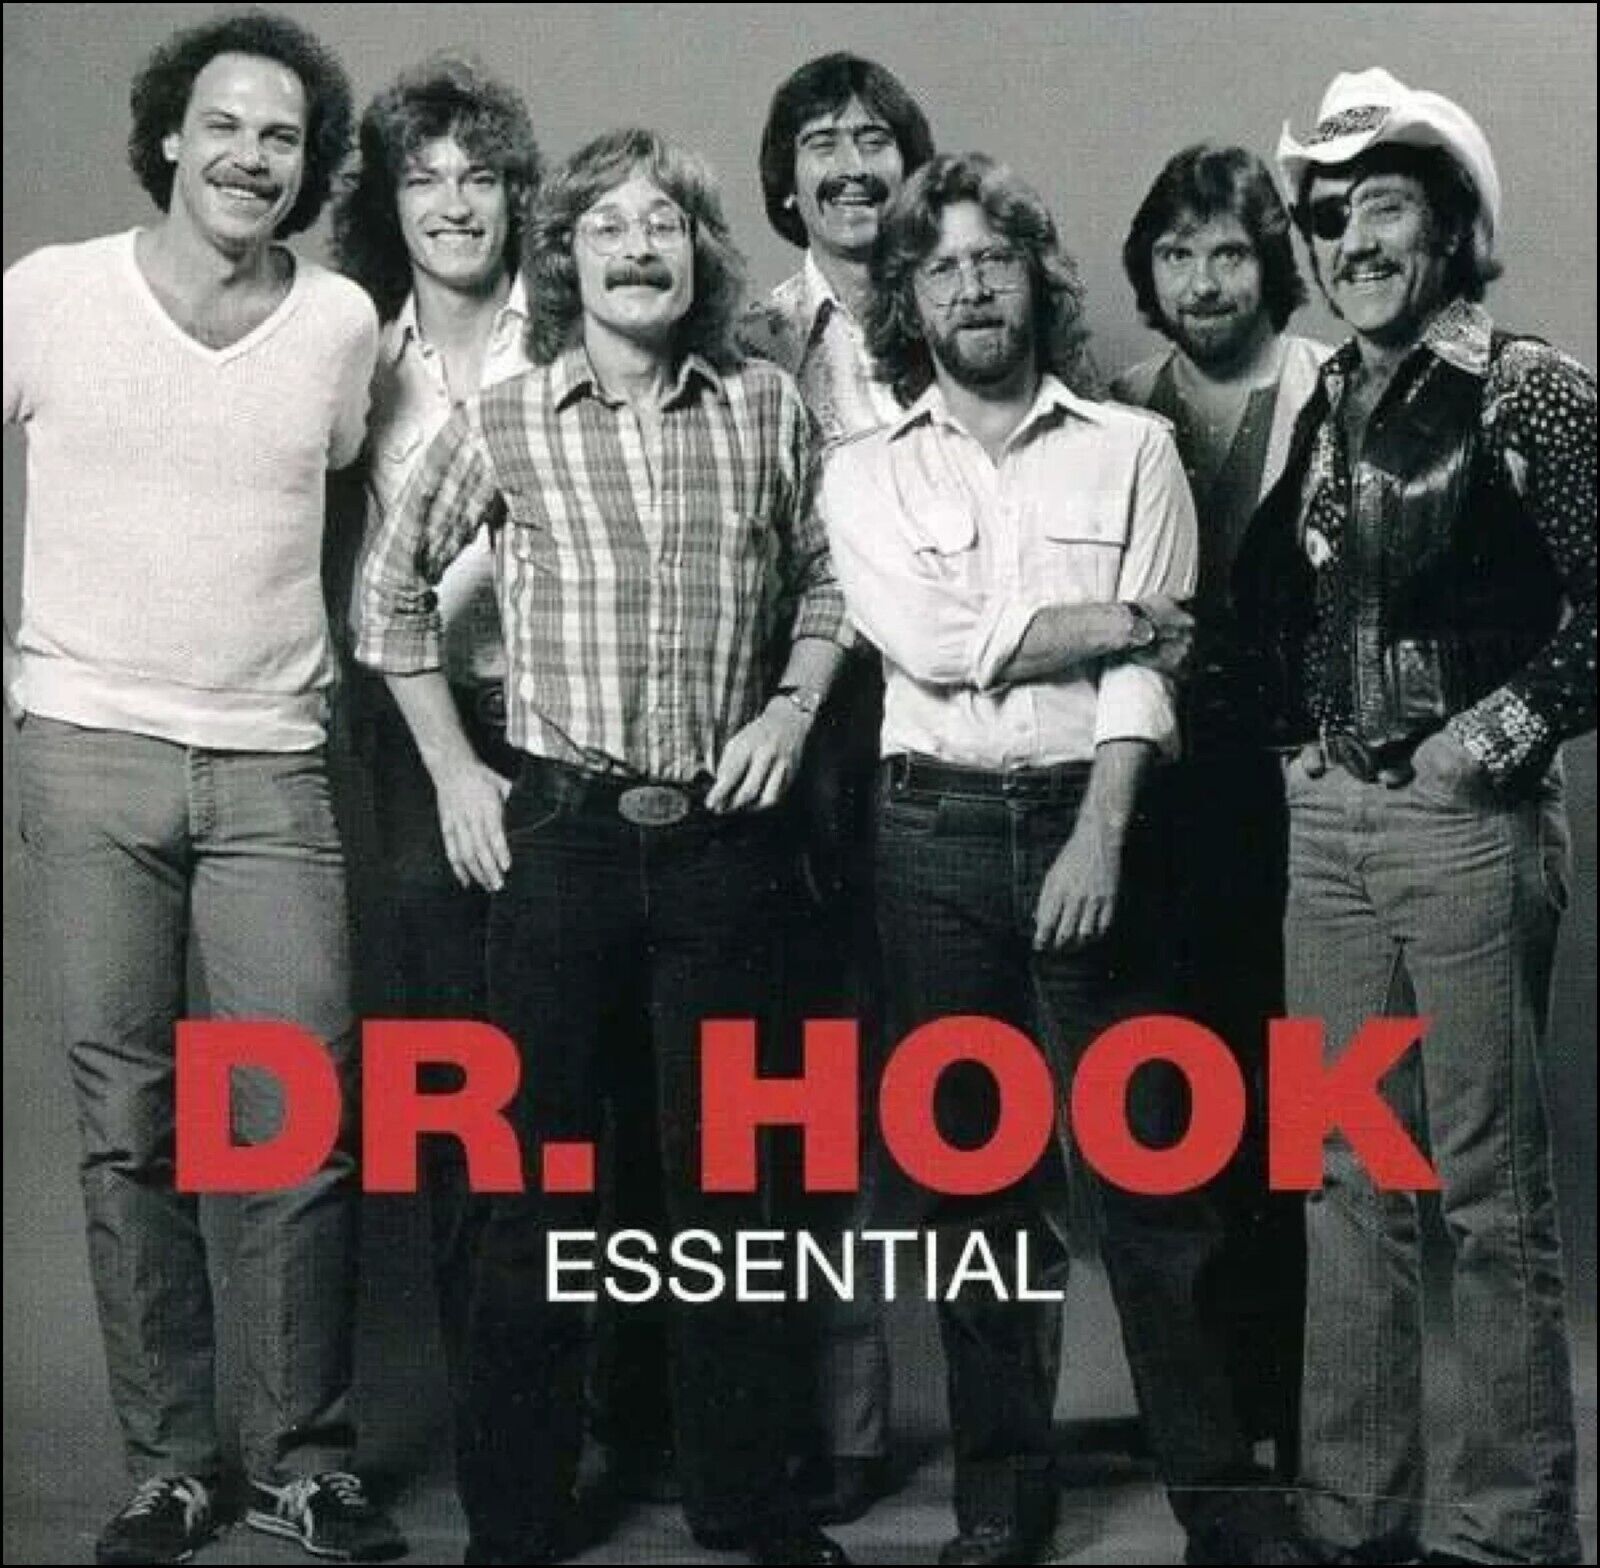 DR. HOOK  *  16 Greatest Hits  * New CD * All Original Recordings * NEW